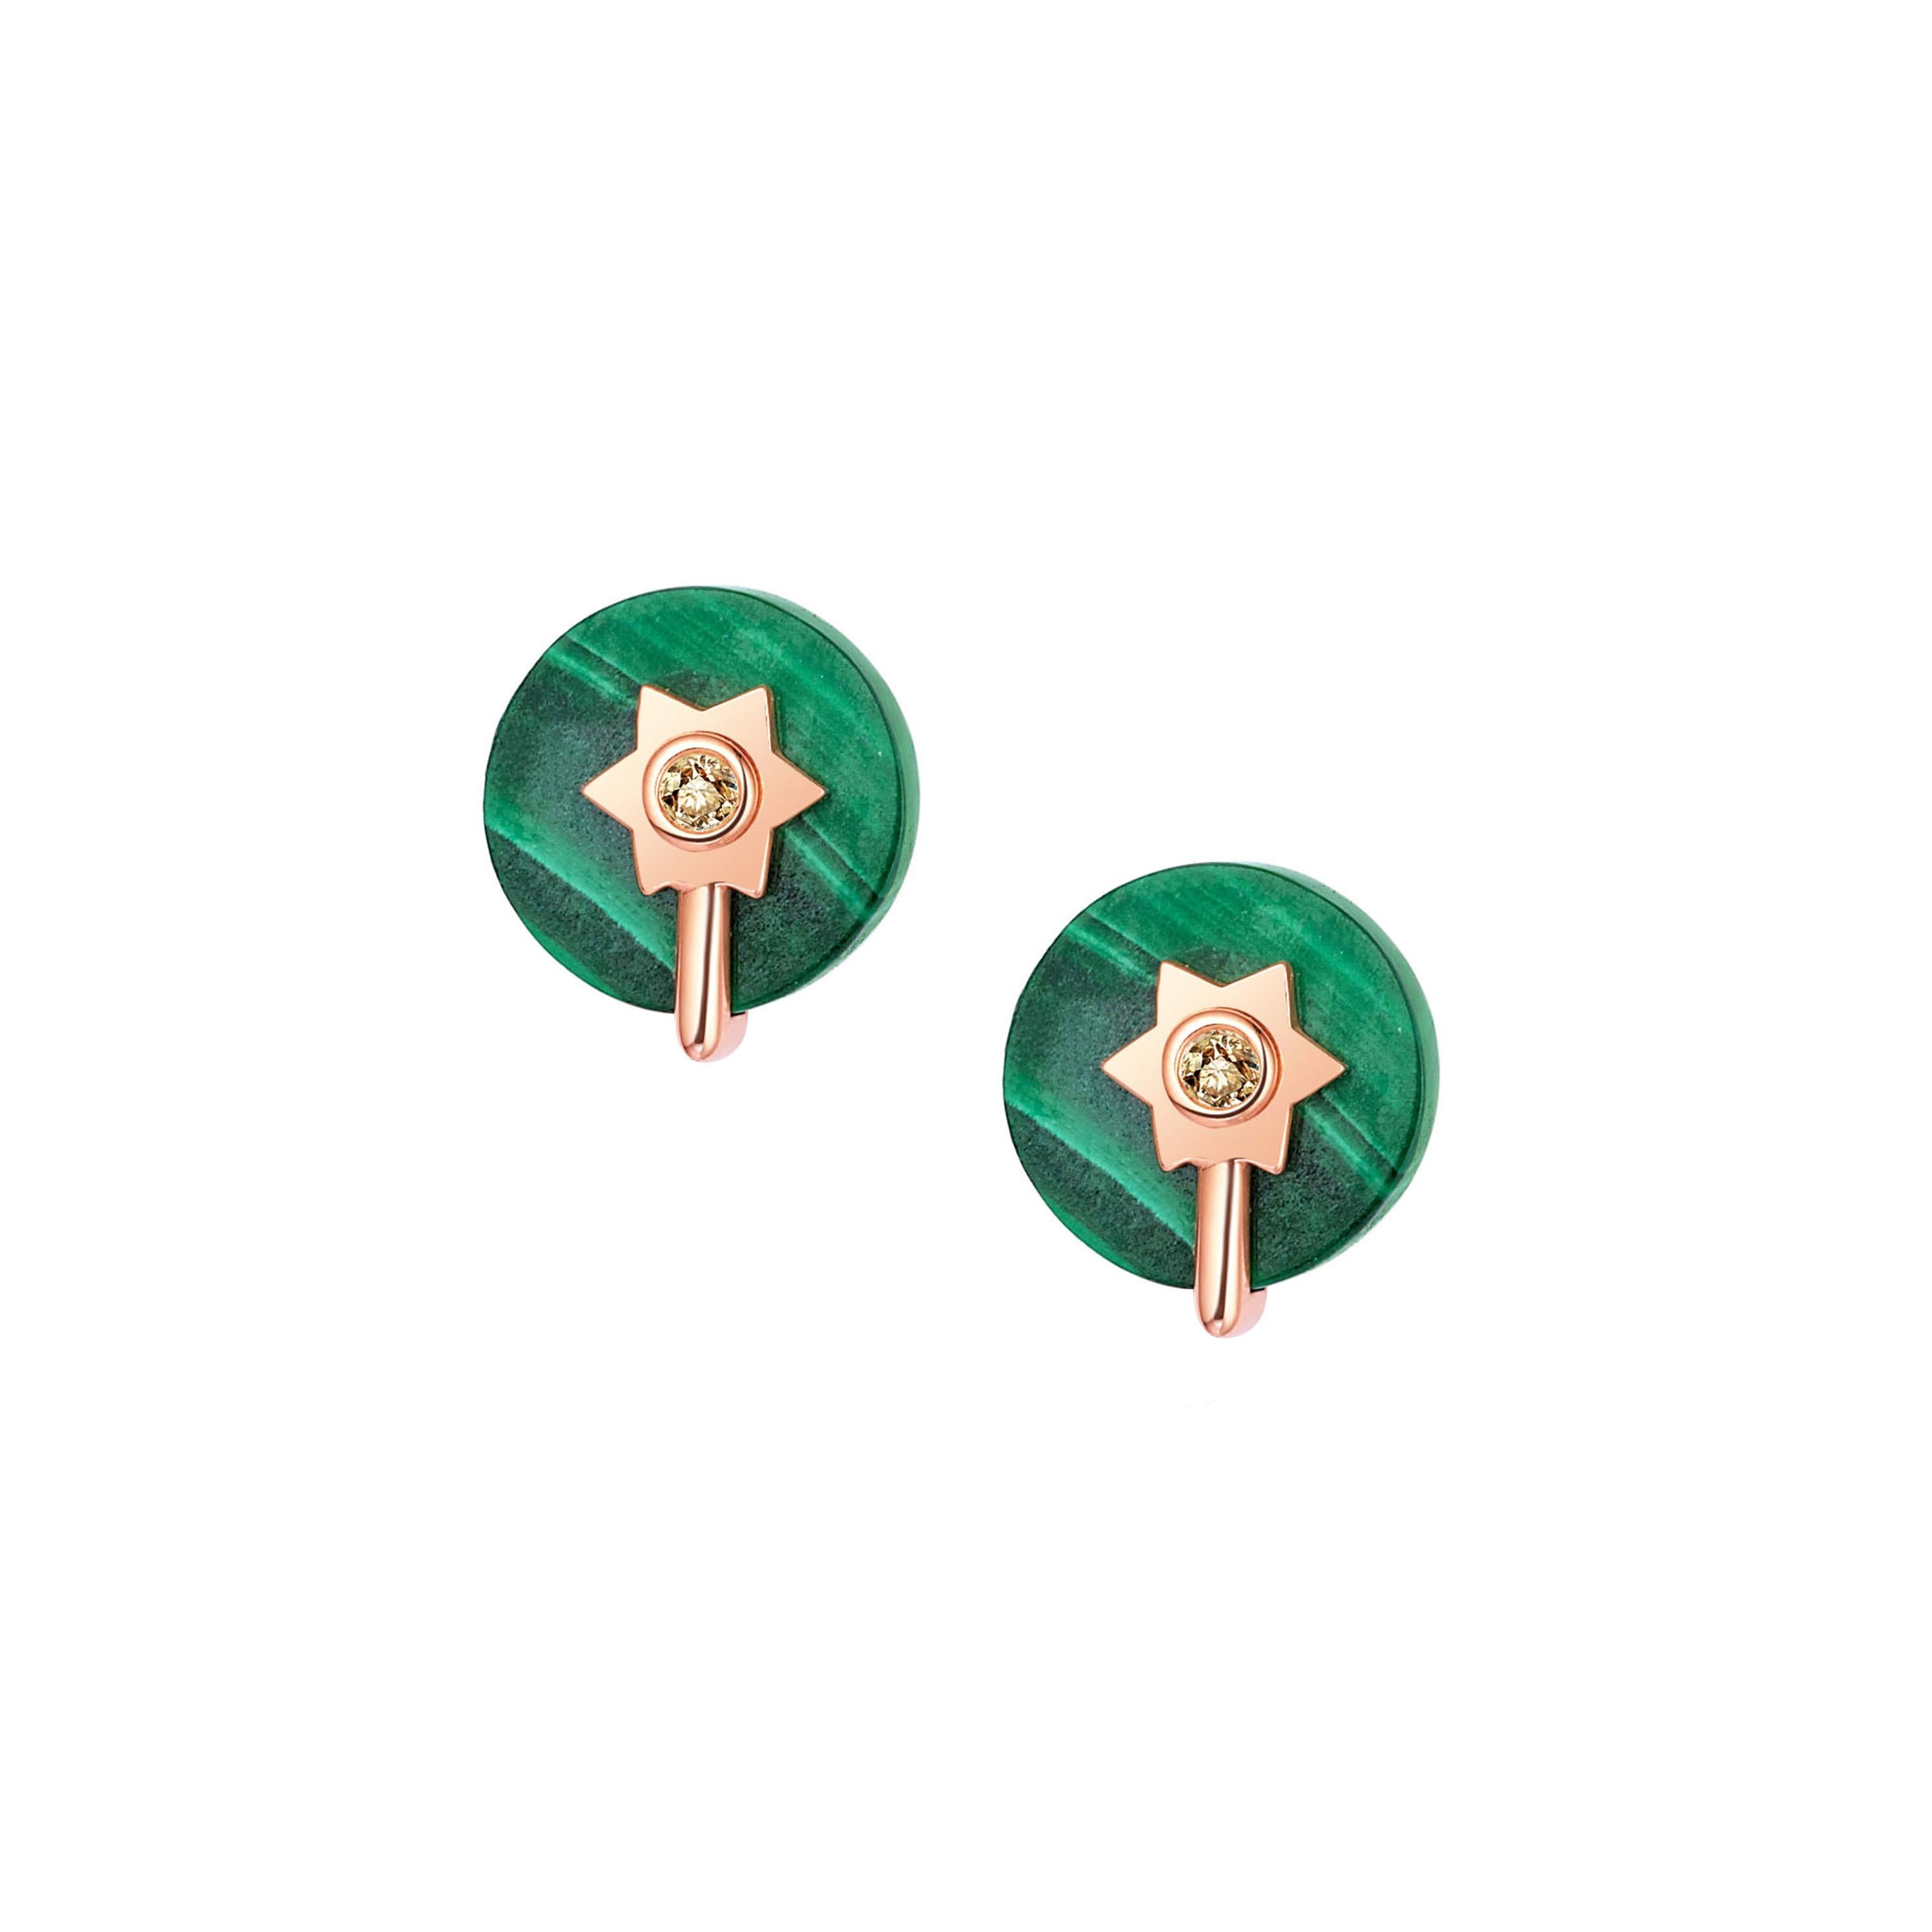 Description:
Stella two-way wear earrings with spinning 10mm malachite and 0.042ct champagne diamond set in 14ct rose gold. Wear as dangle earrings, or detach star chain detail for stud earrings.

Inspiration:
The Stella collection was inspired by